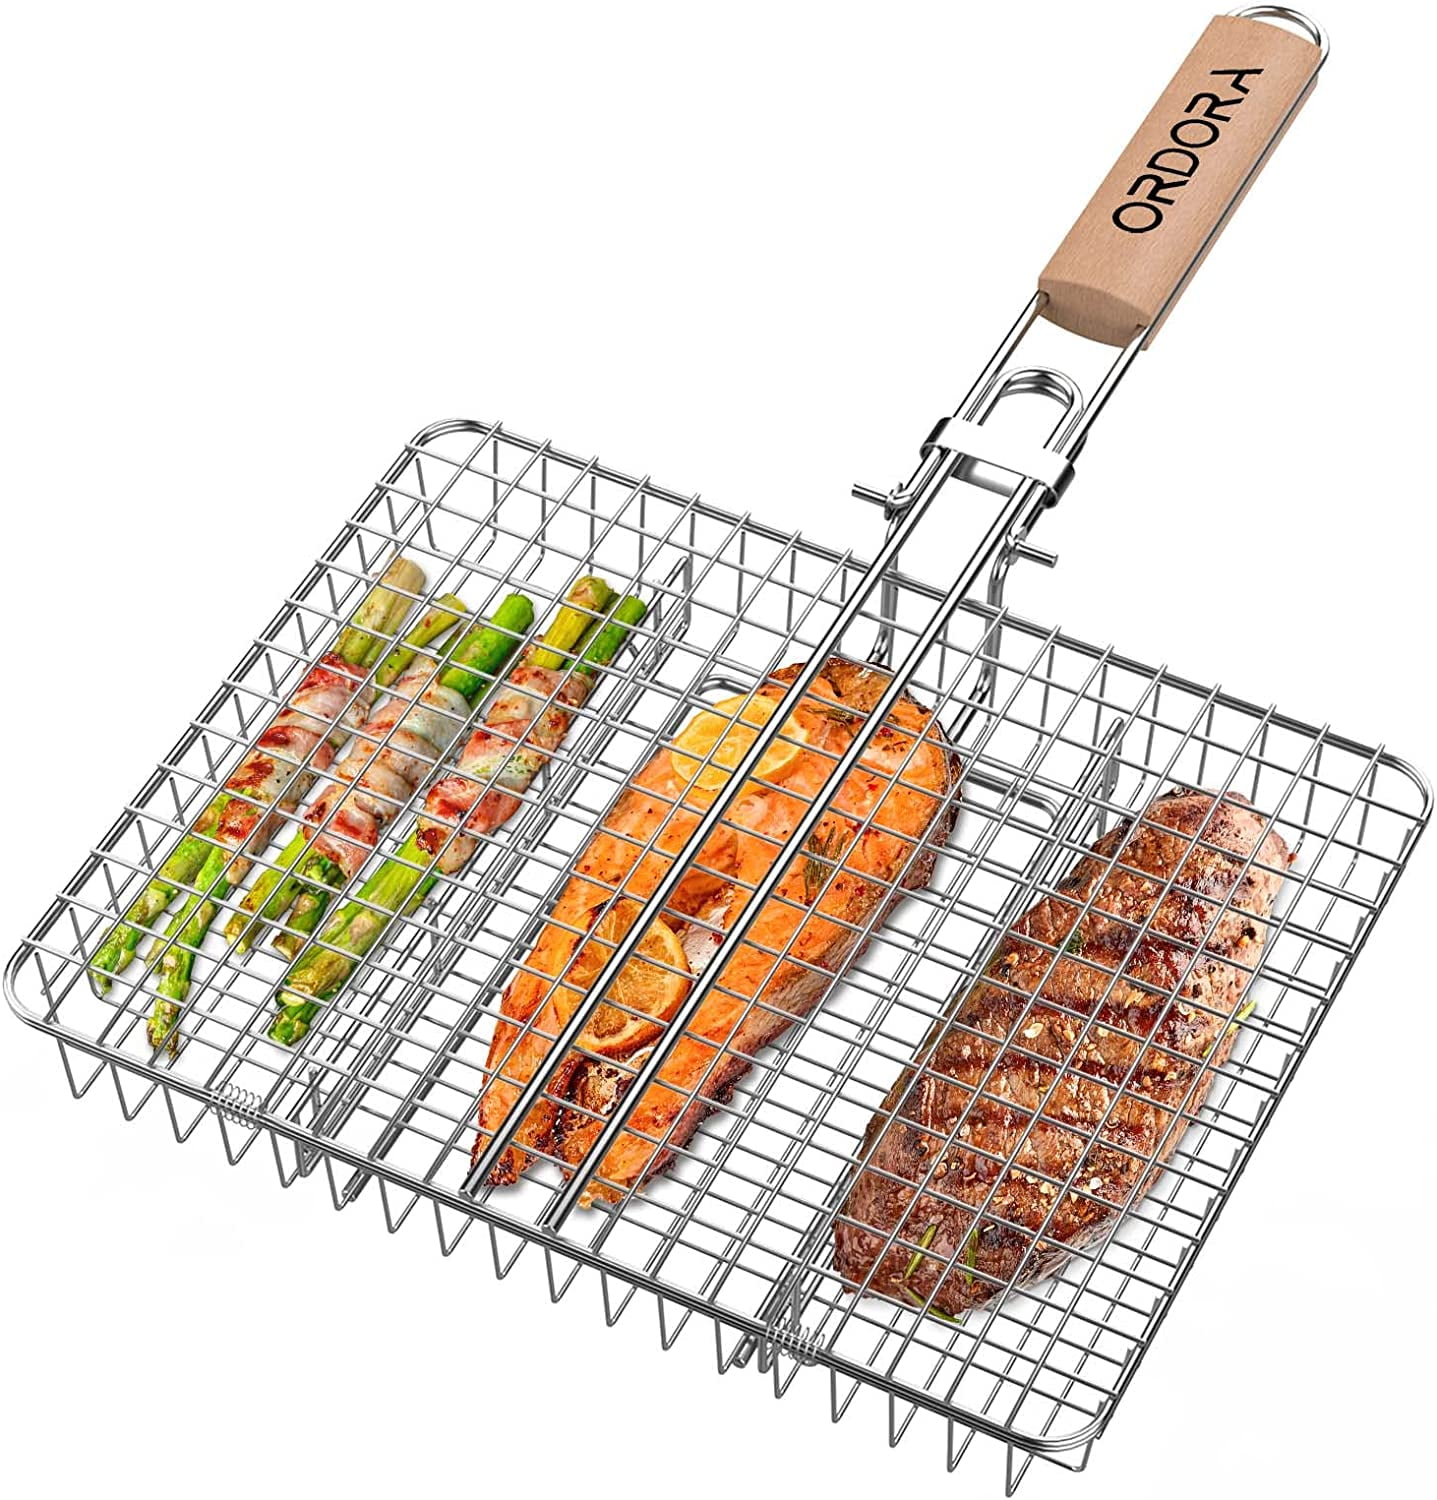 ALL-CLAD ALL-CLAD Outdoor Square Grill Basket J1370364